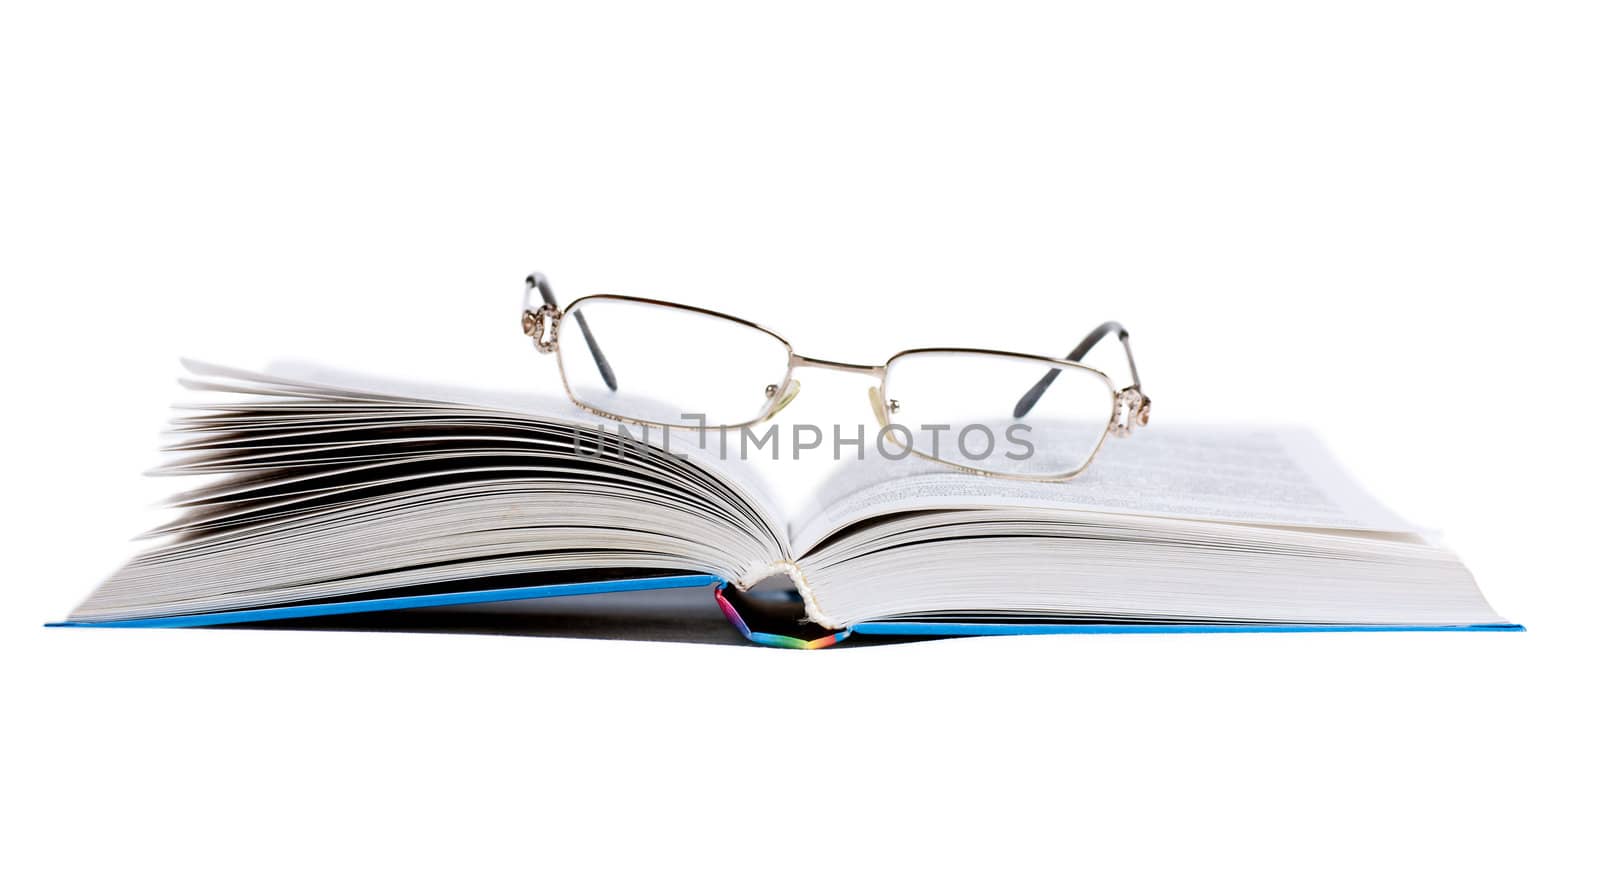 Opened book and glasses on it isolated on the white